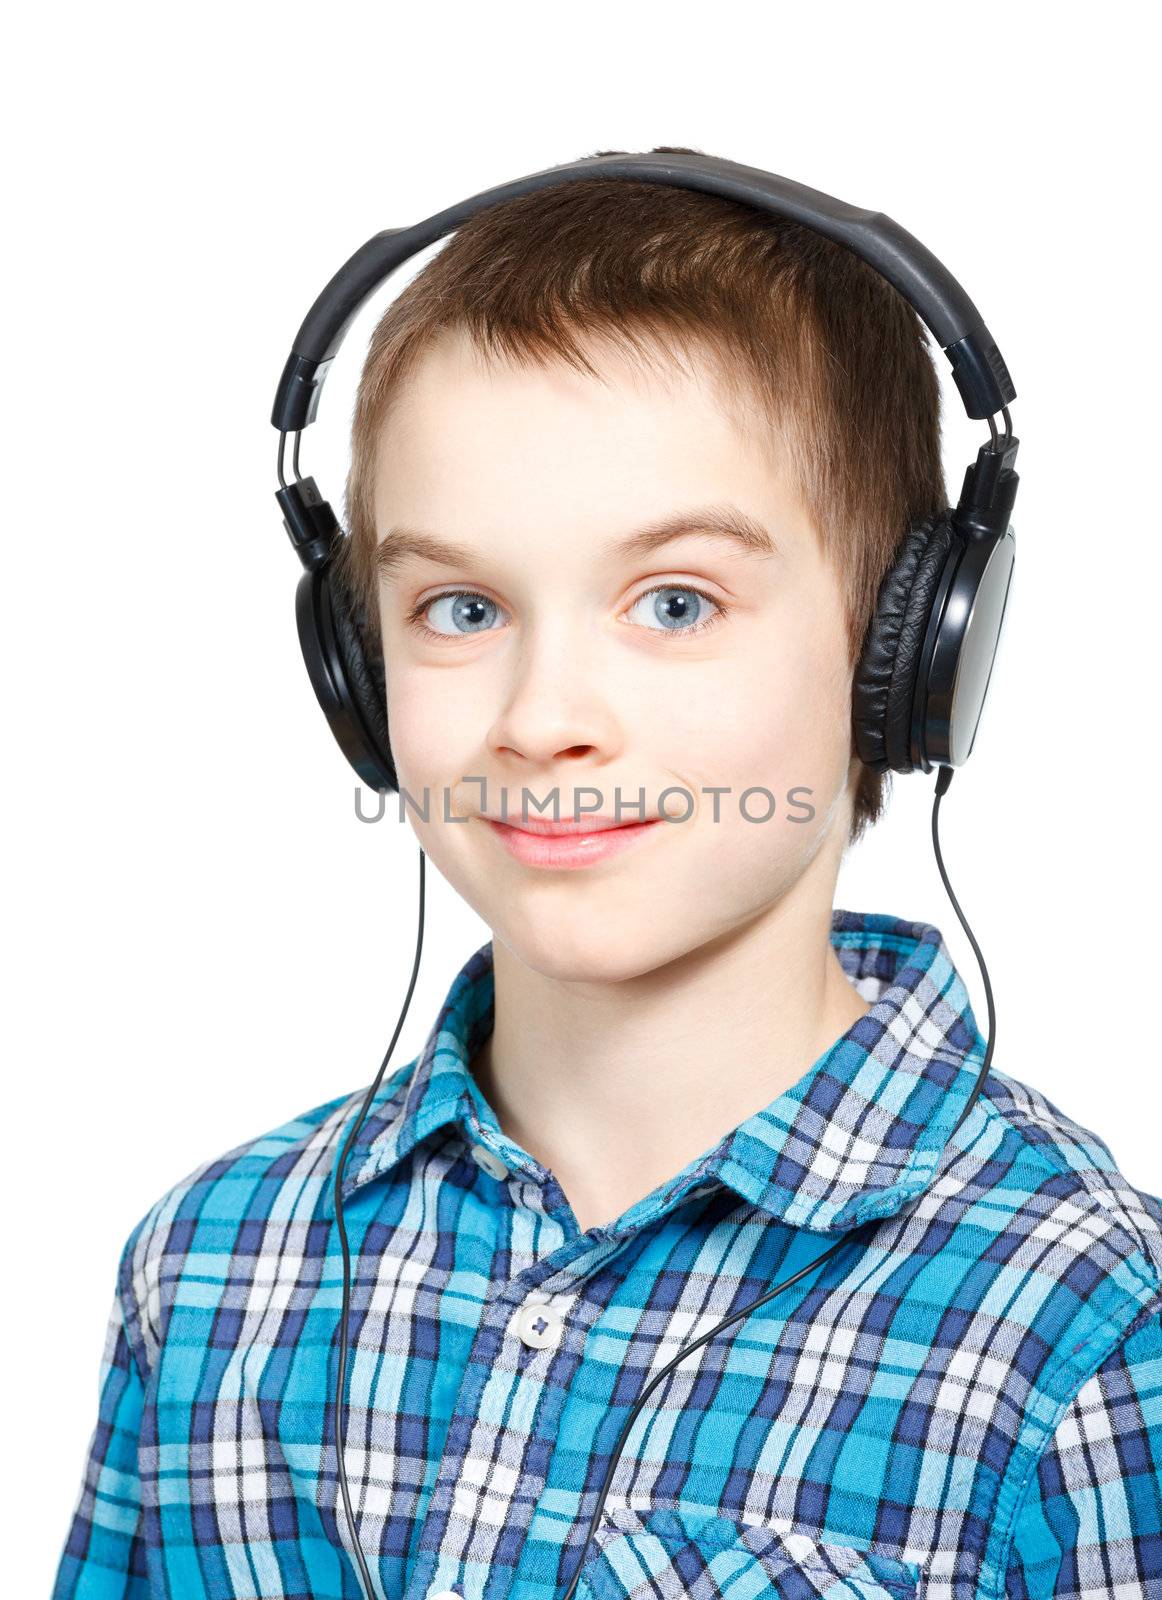 Portrait of 10 years boy wearing headphones over a white background